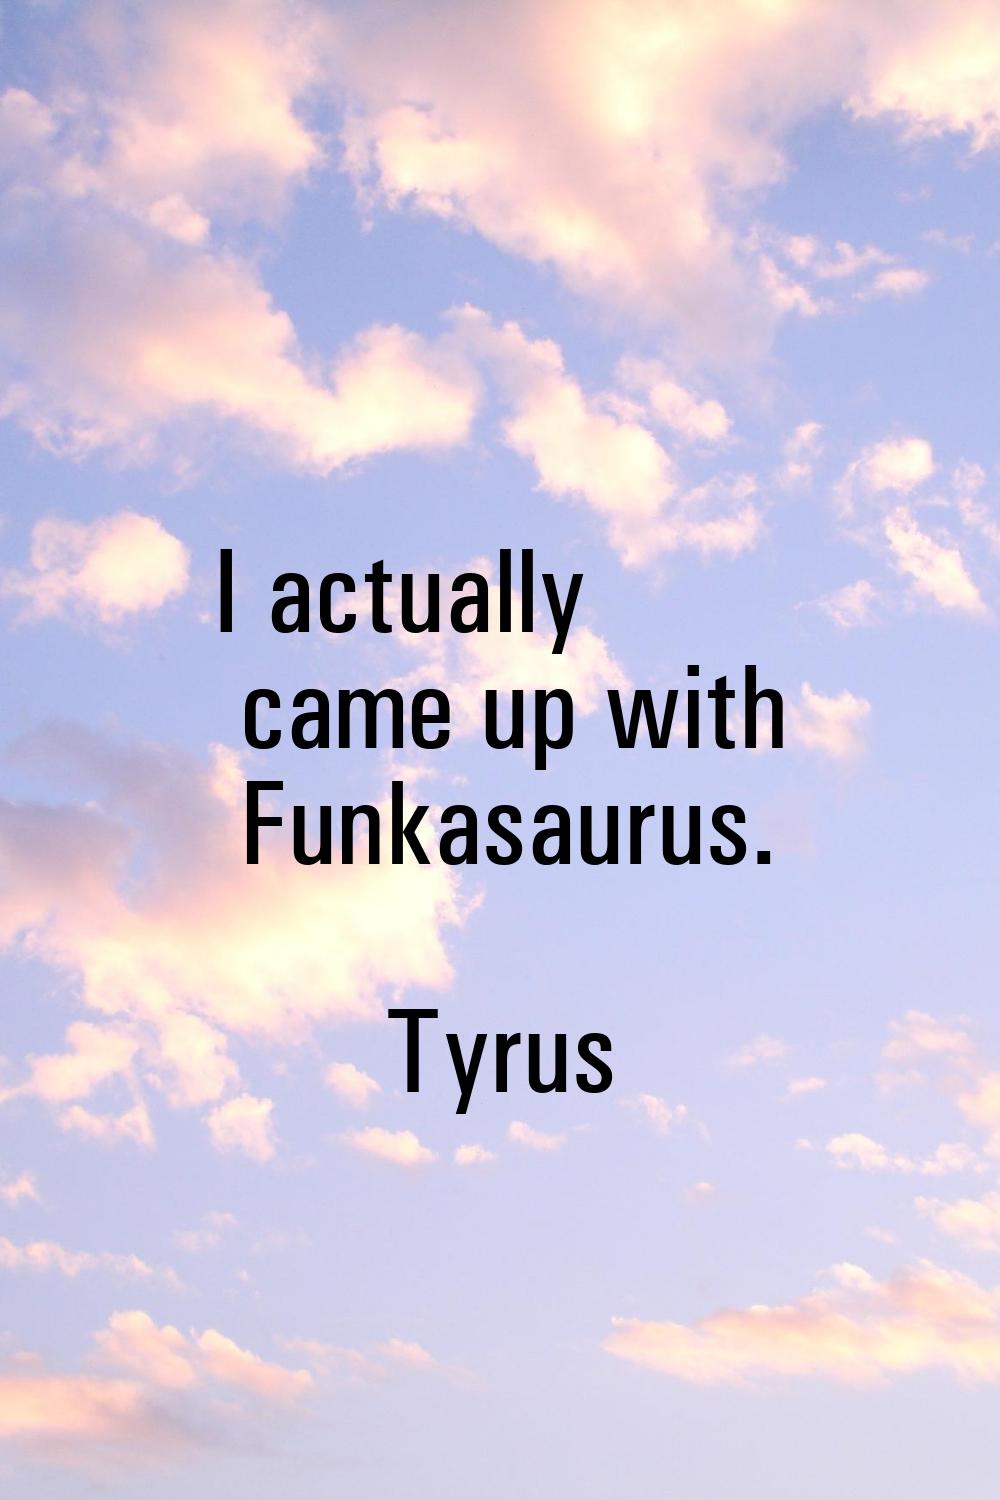 I actually came up with Funkasaurus.